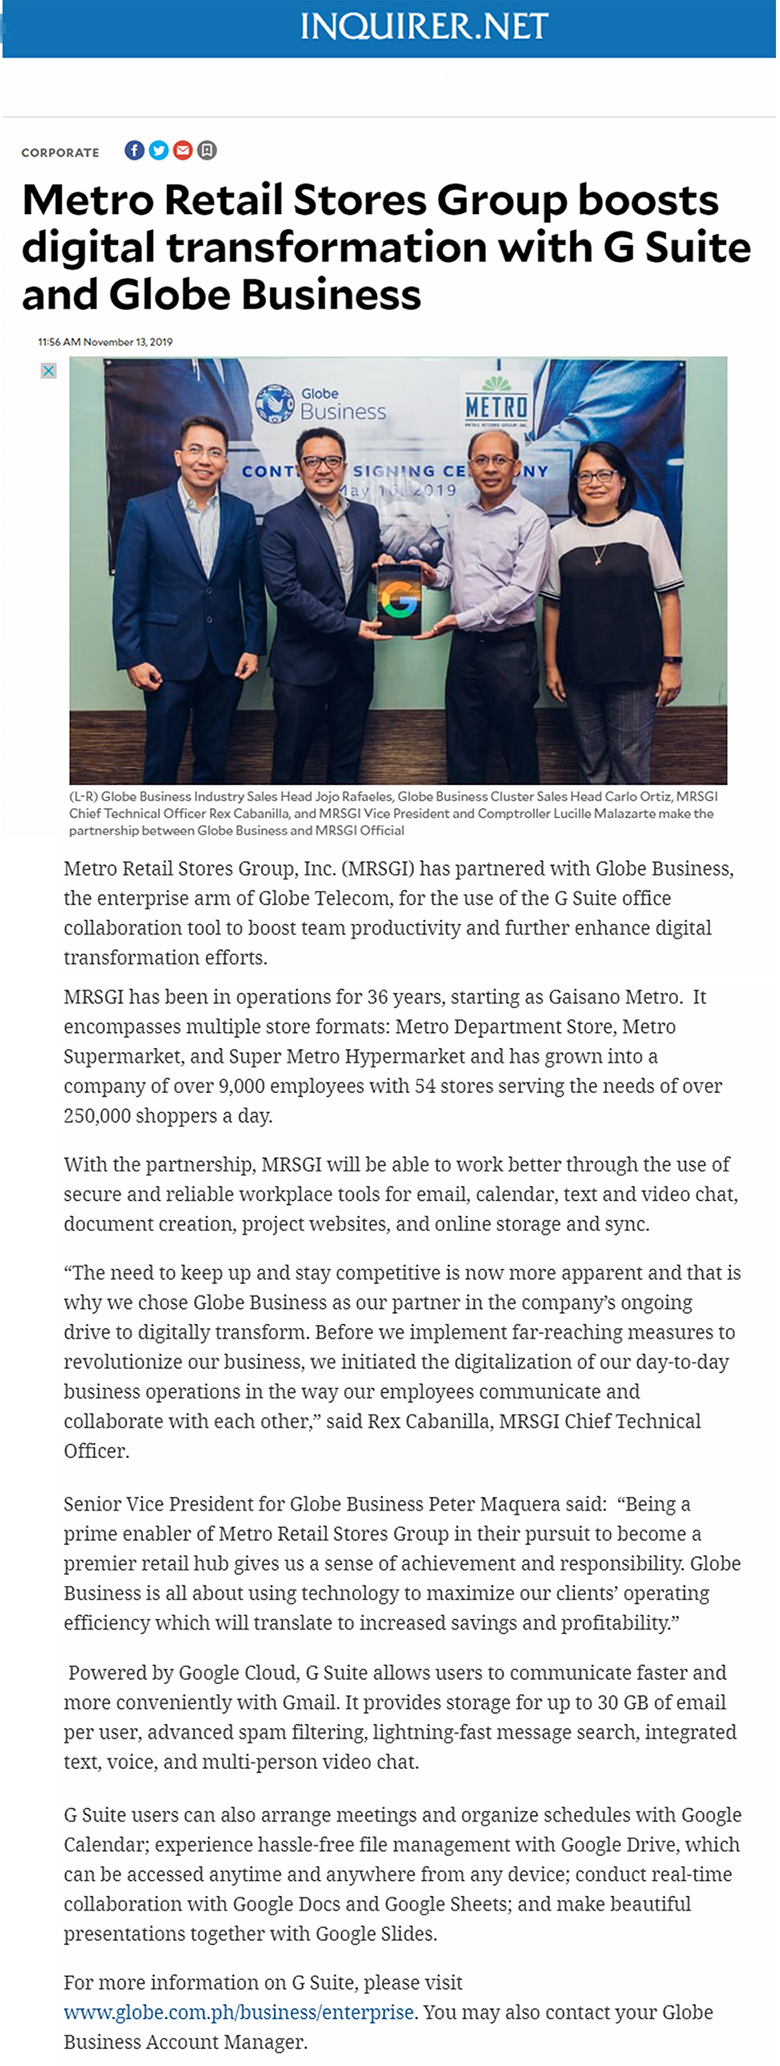 November 13 2019 Metro Retail Stores Group boosts digital transformation with G Suite and Globe Philippine Daily Inquirerwww.inquirer.net